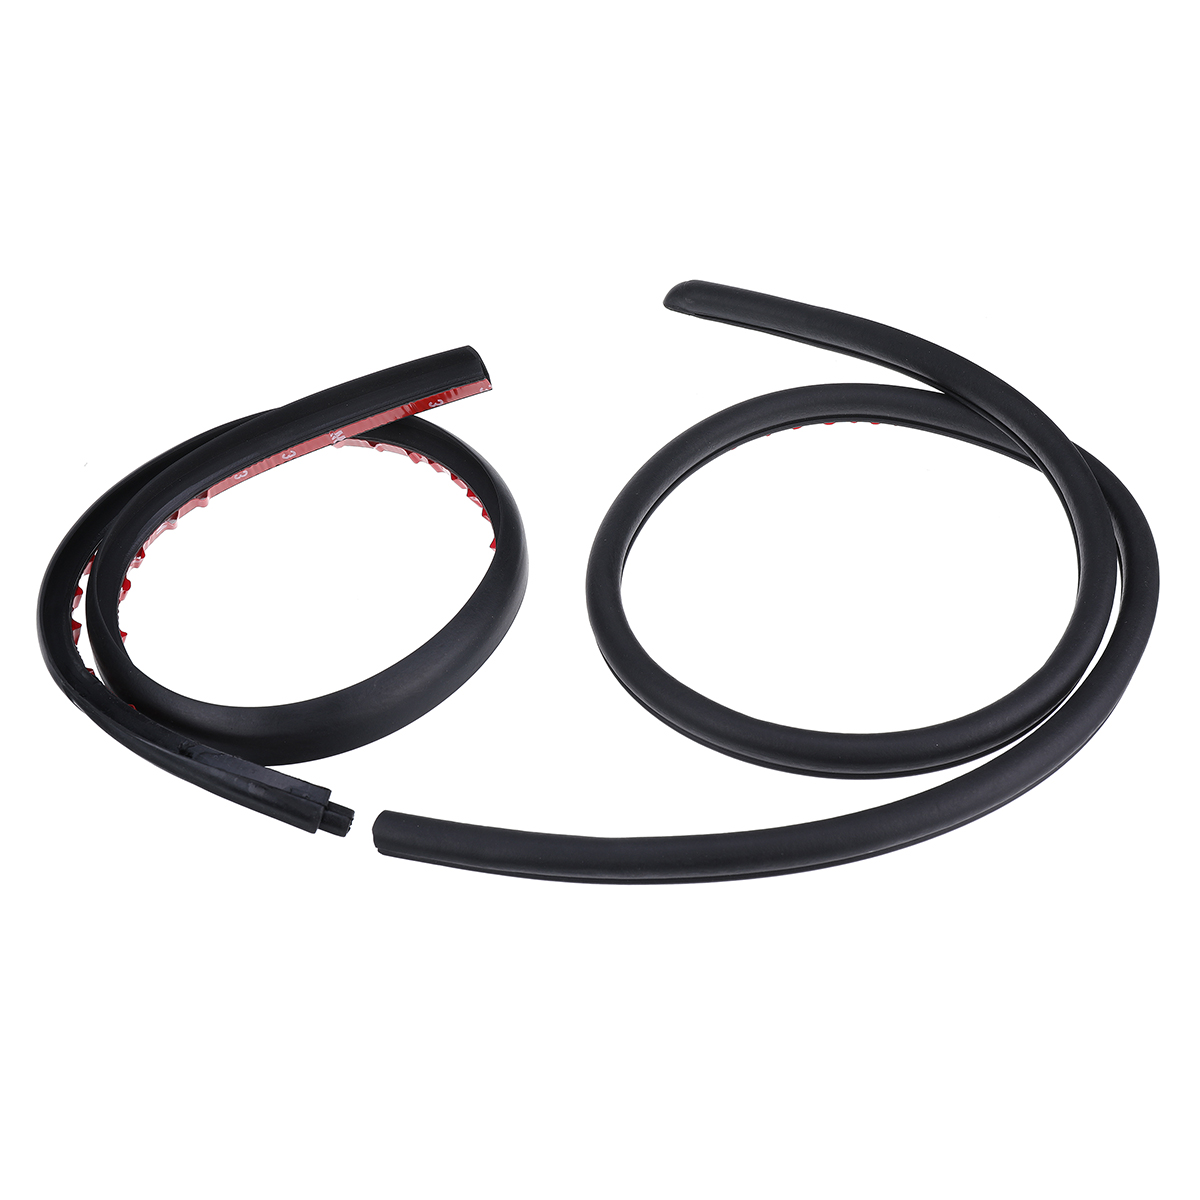 MATCC Car Door Seal Kit for Tesla Model 3 EPDM Self-Adhesive Soundproof Rubber Accessories Weatherstrip Wind Noise Reduction